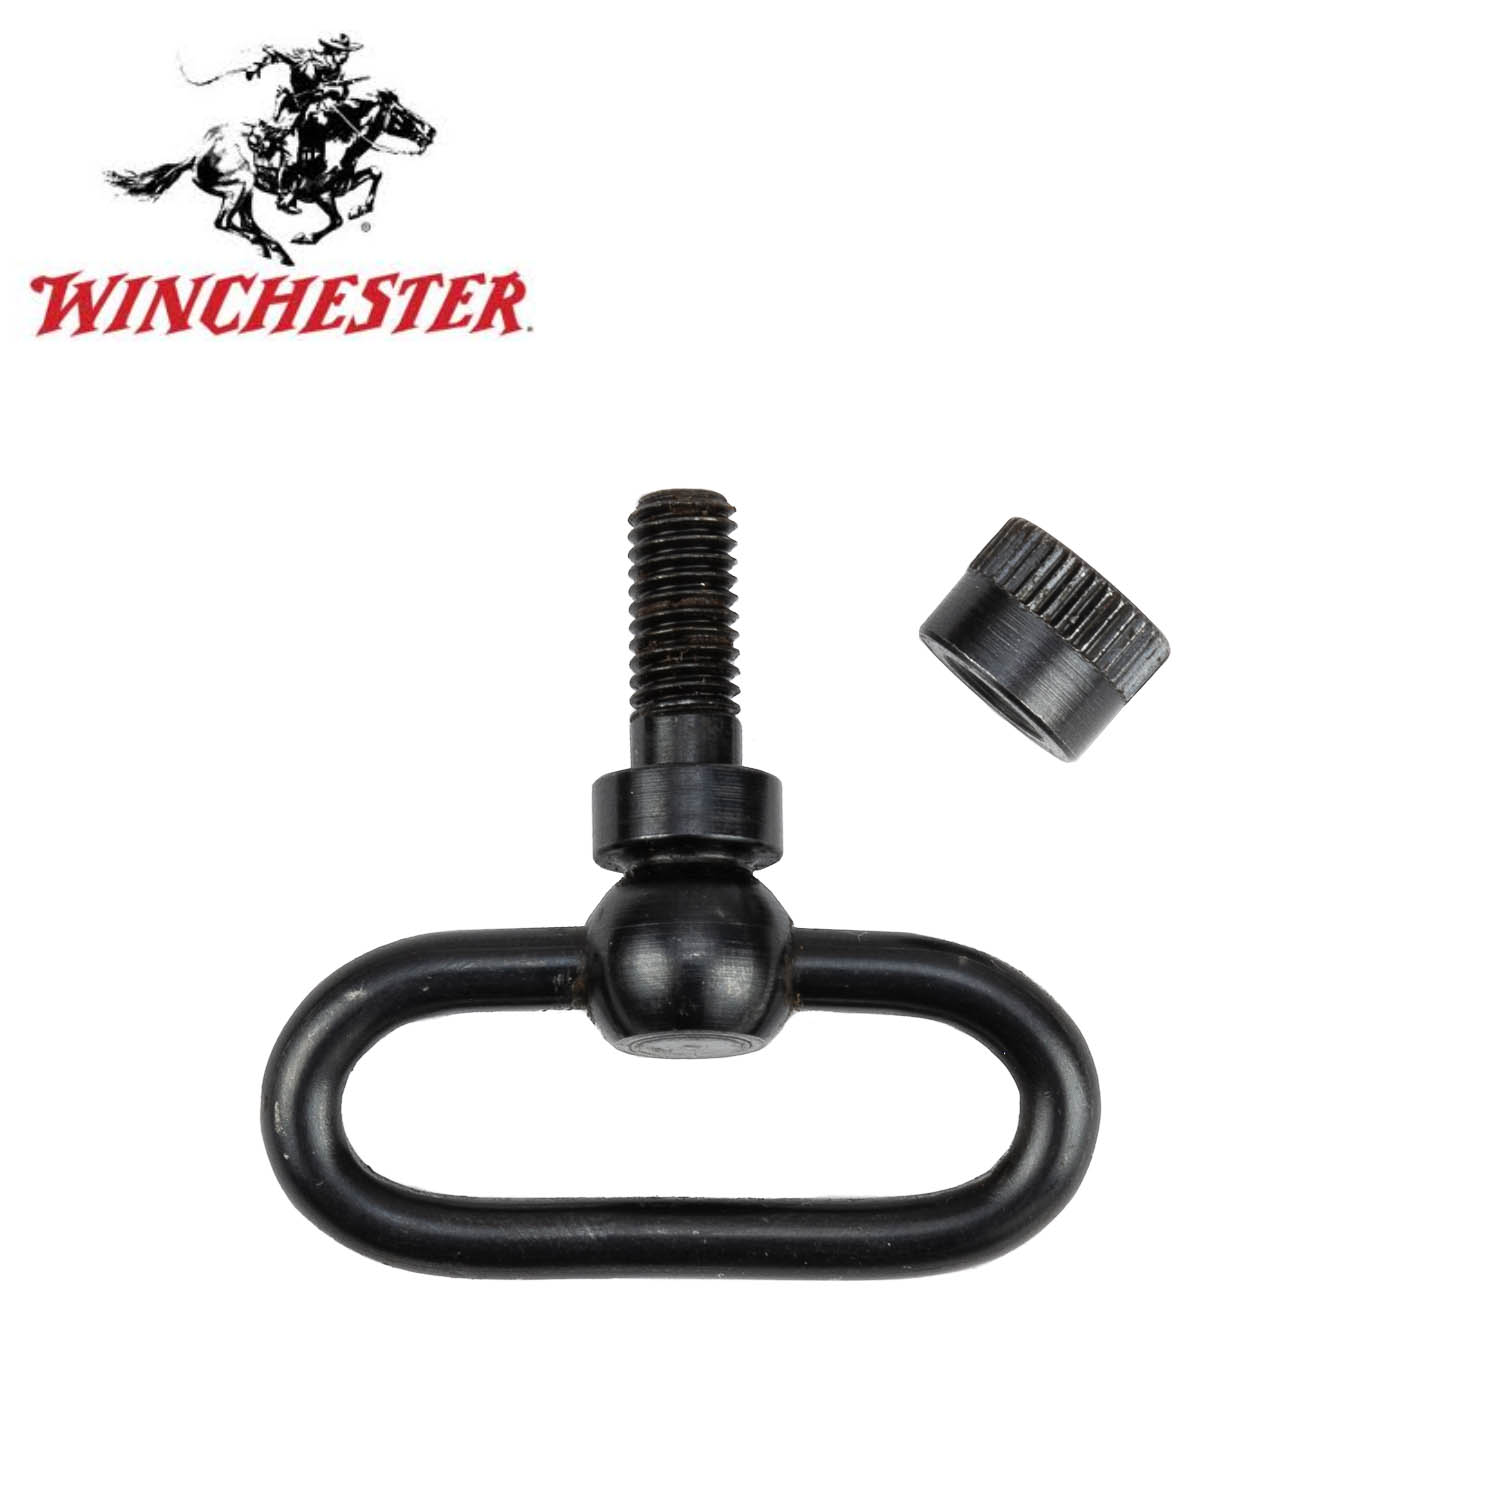 WINCHESTER BRAND SLING SWIVELS 1 1/4'' NEW IN WRAP